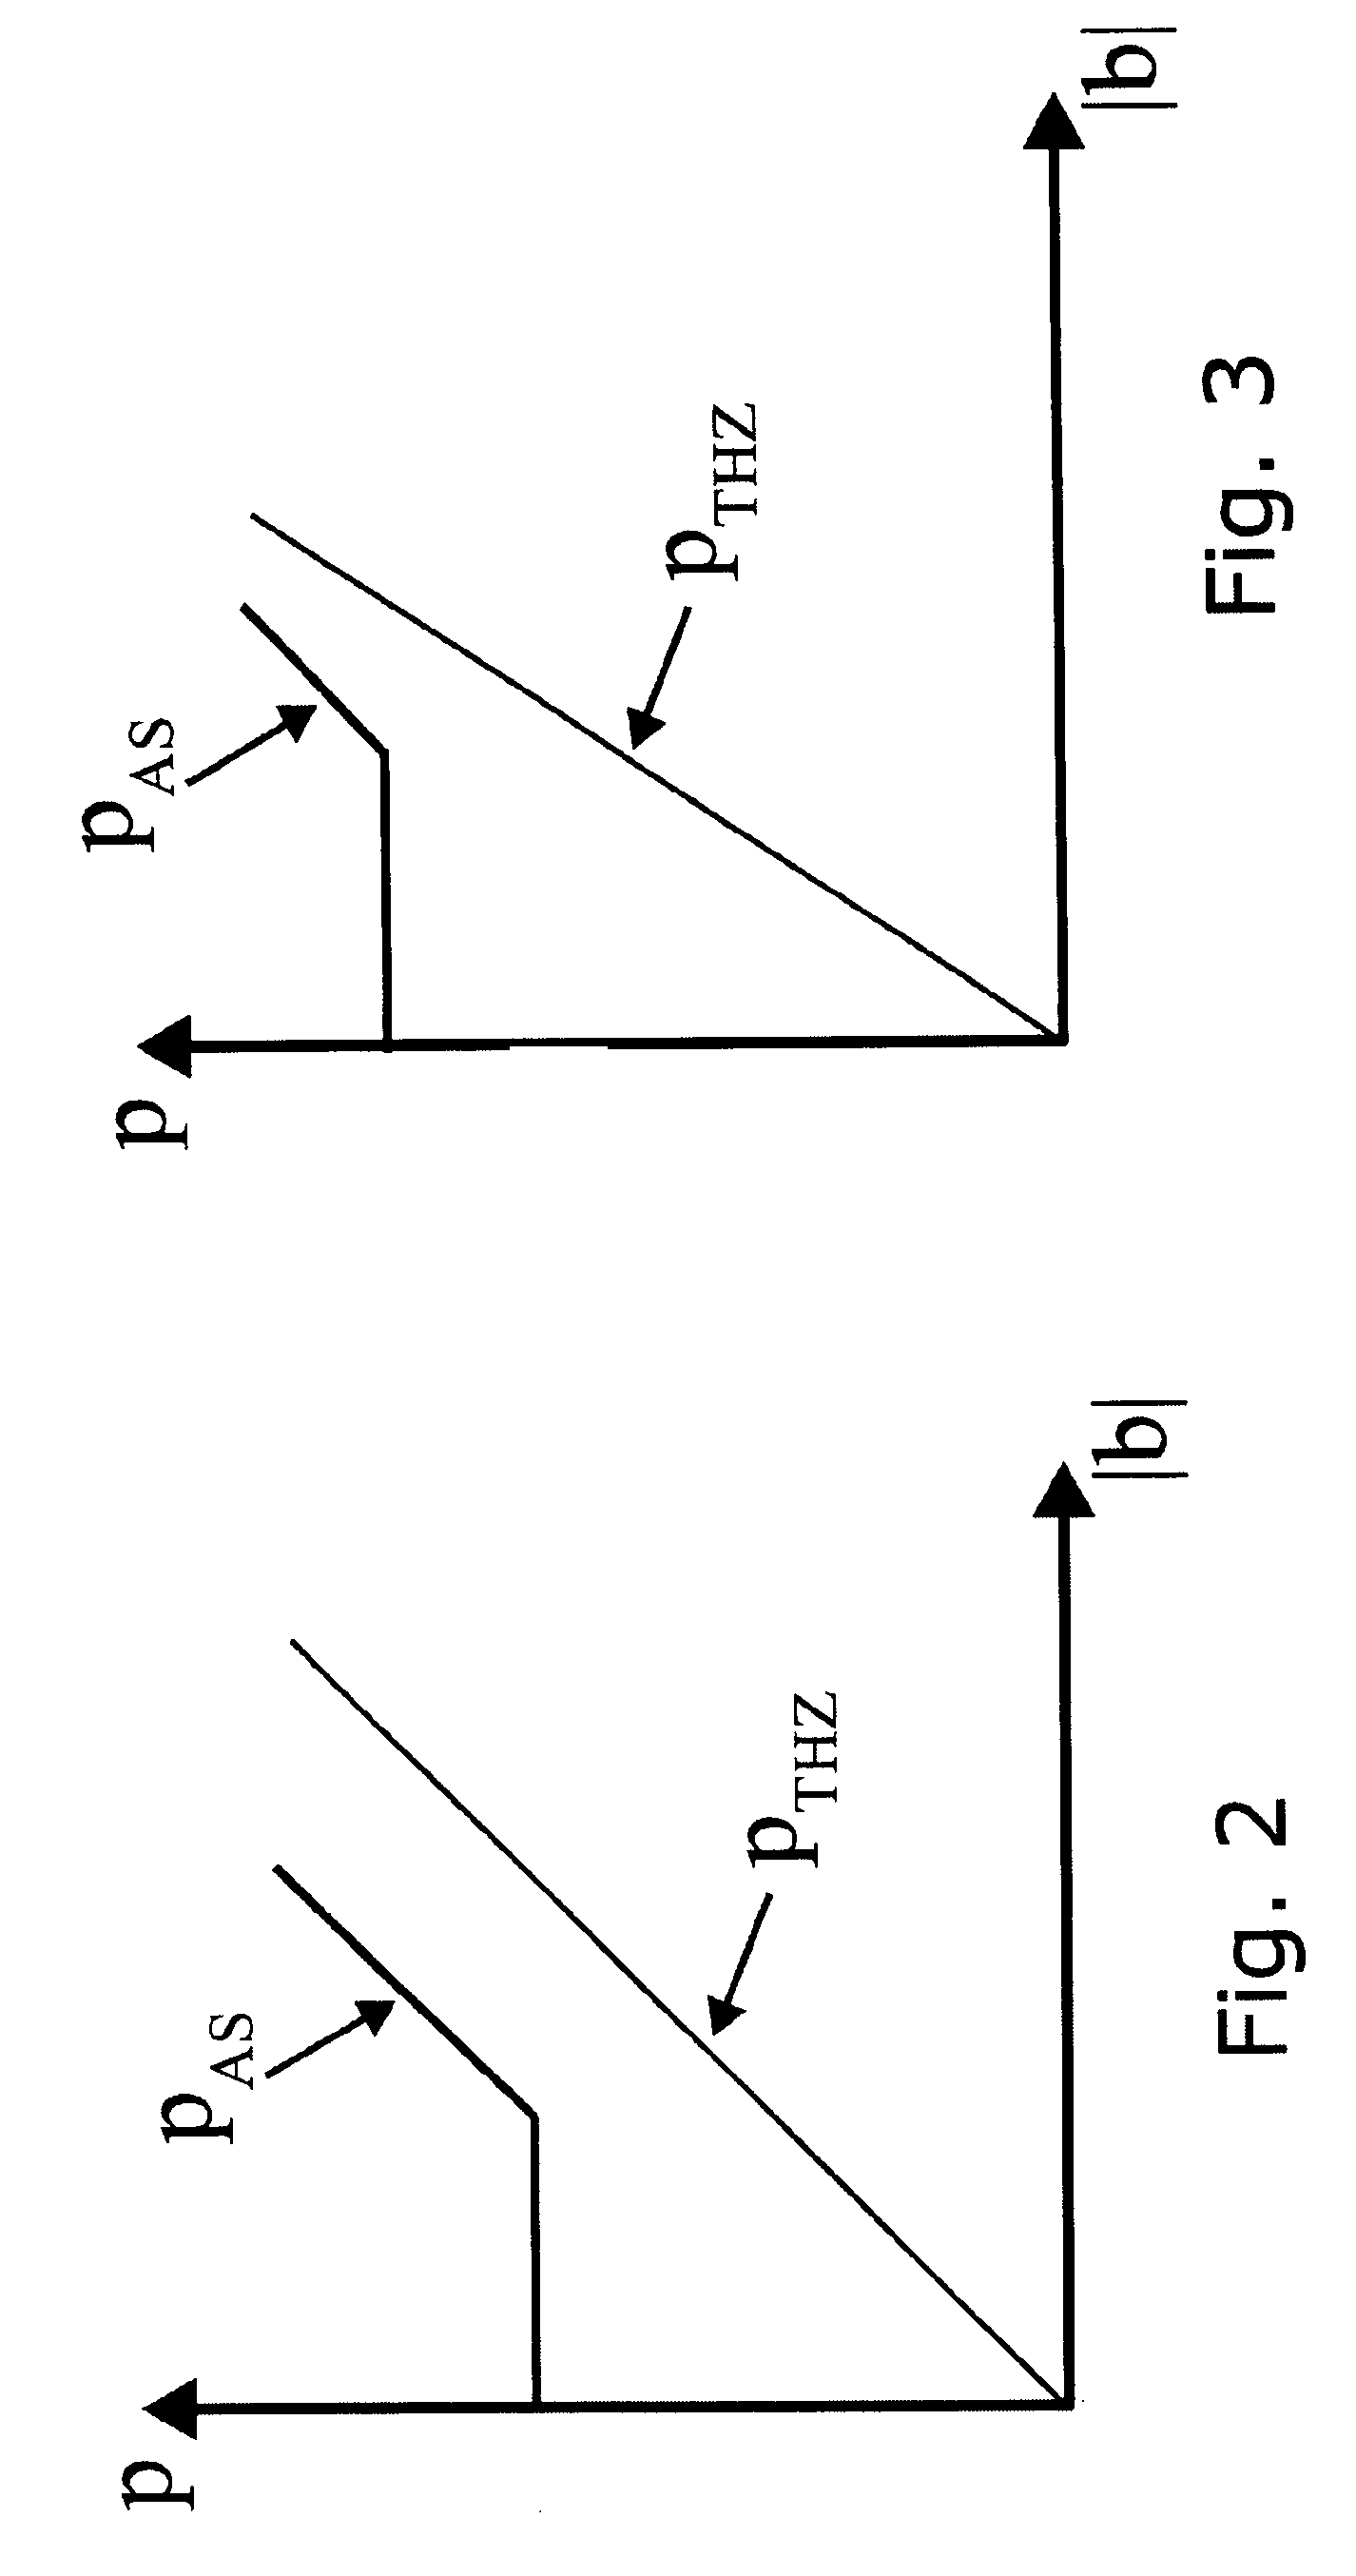 Method for supporting a brake system in case of reduced effectiveness of the vehicle brake system